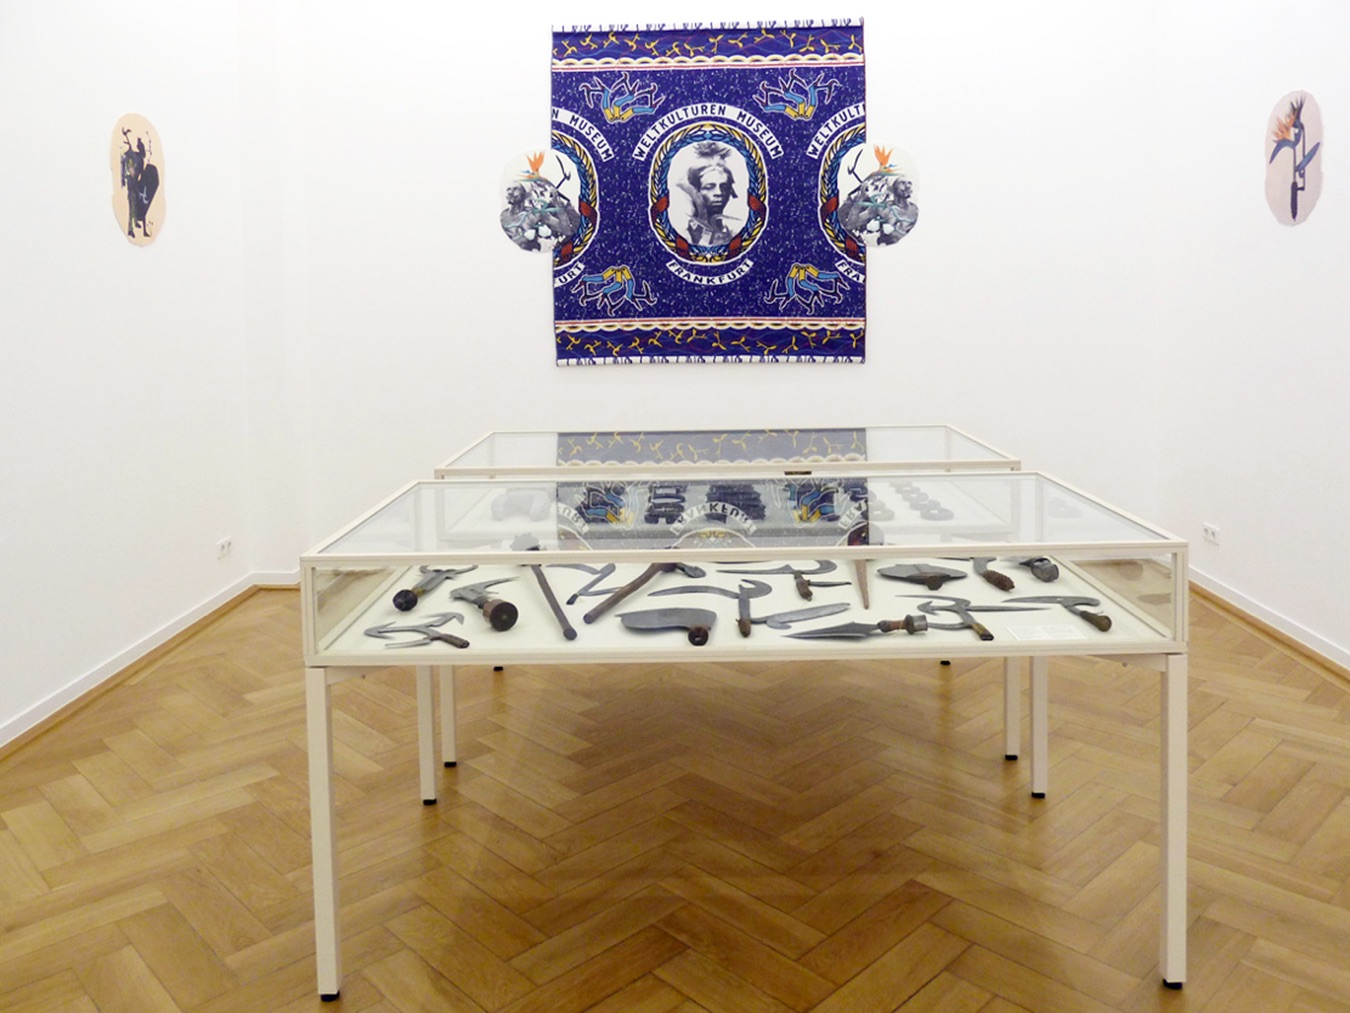 Otobong Nkanga - Object Atlas - Facing the Opponent (exhibition view), 2012